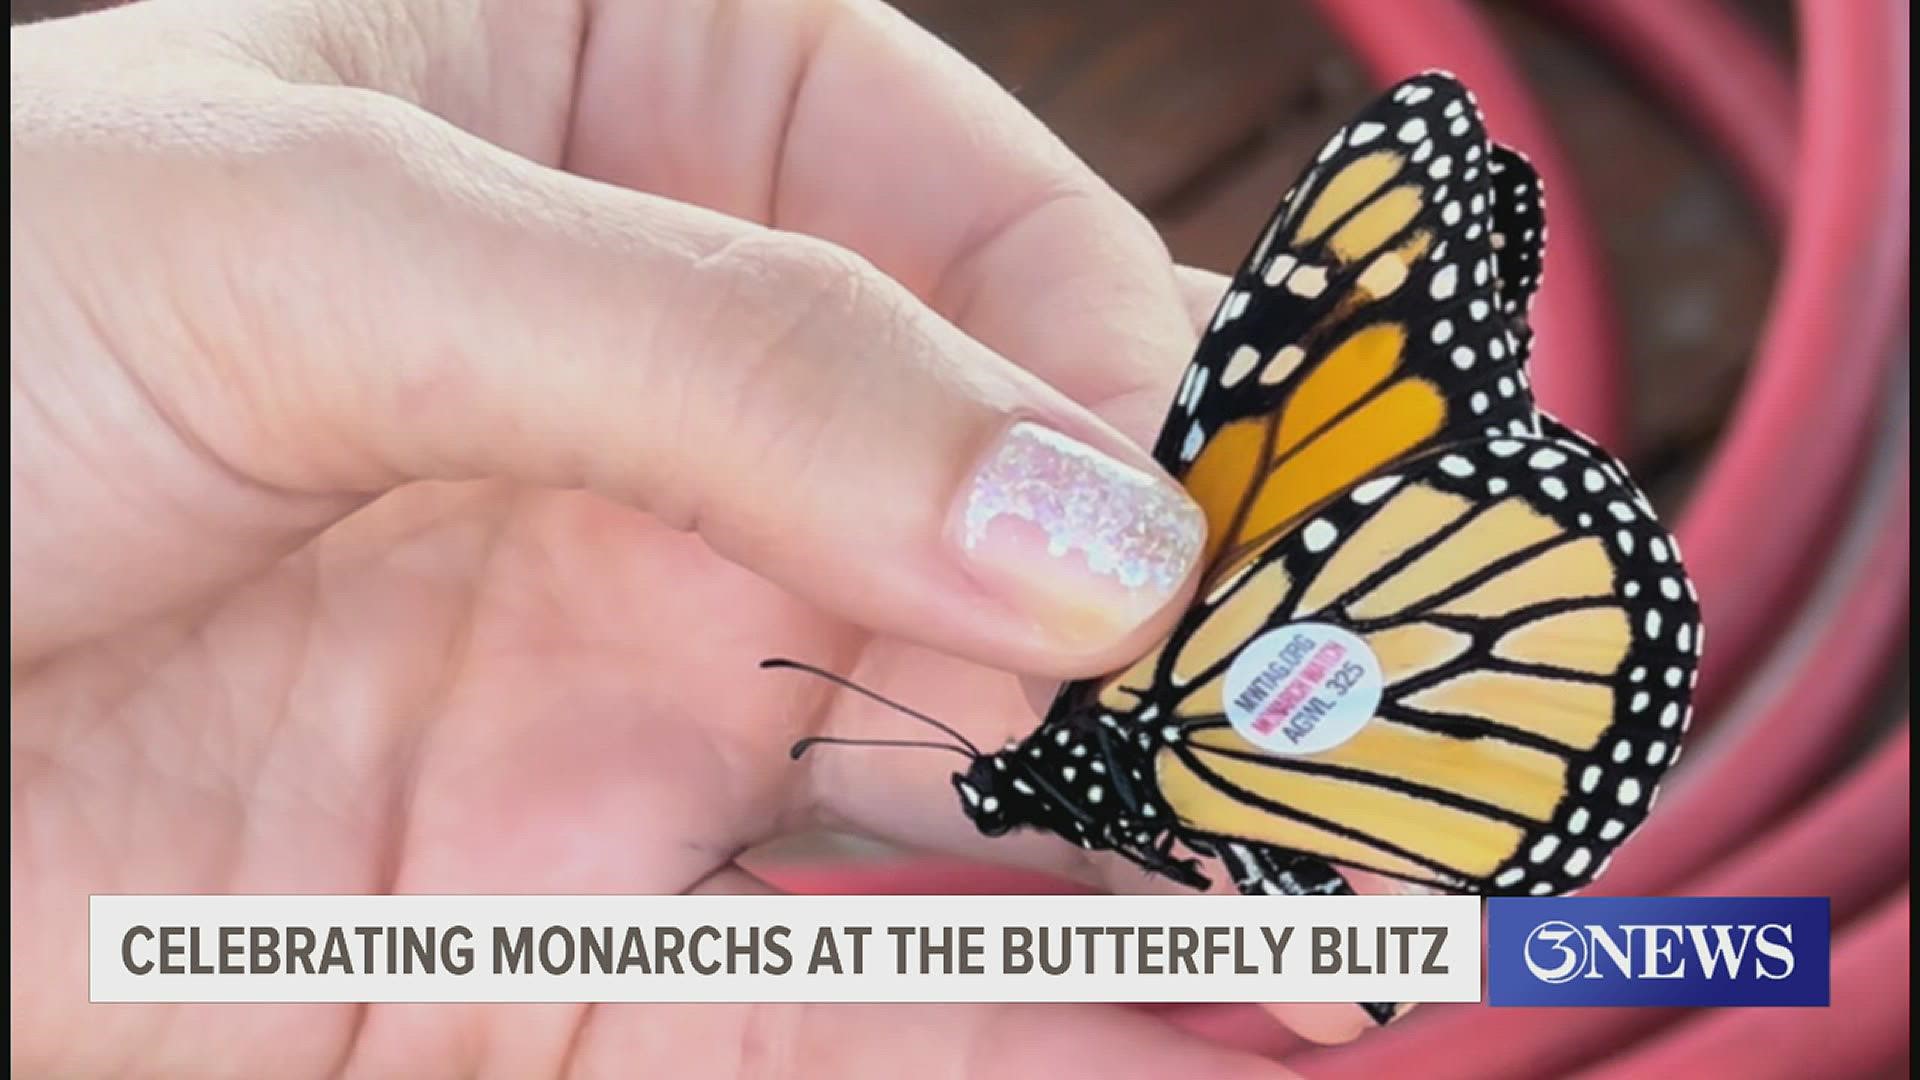 You could say the town is a flutter over the butterfly's arrival.  However, there are also concerns over the monarch's dwindling numbers.